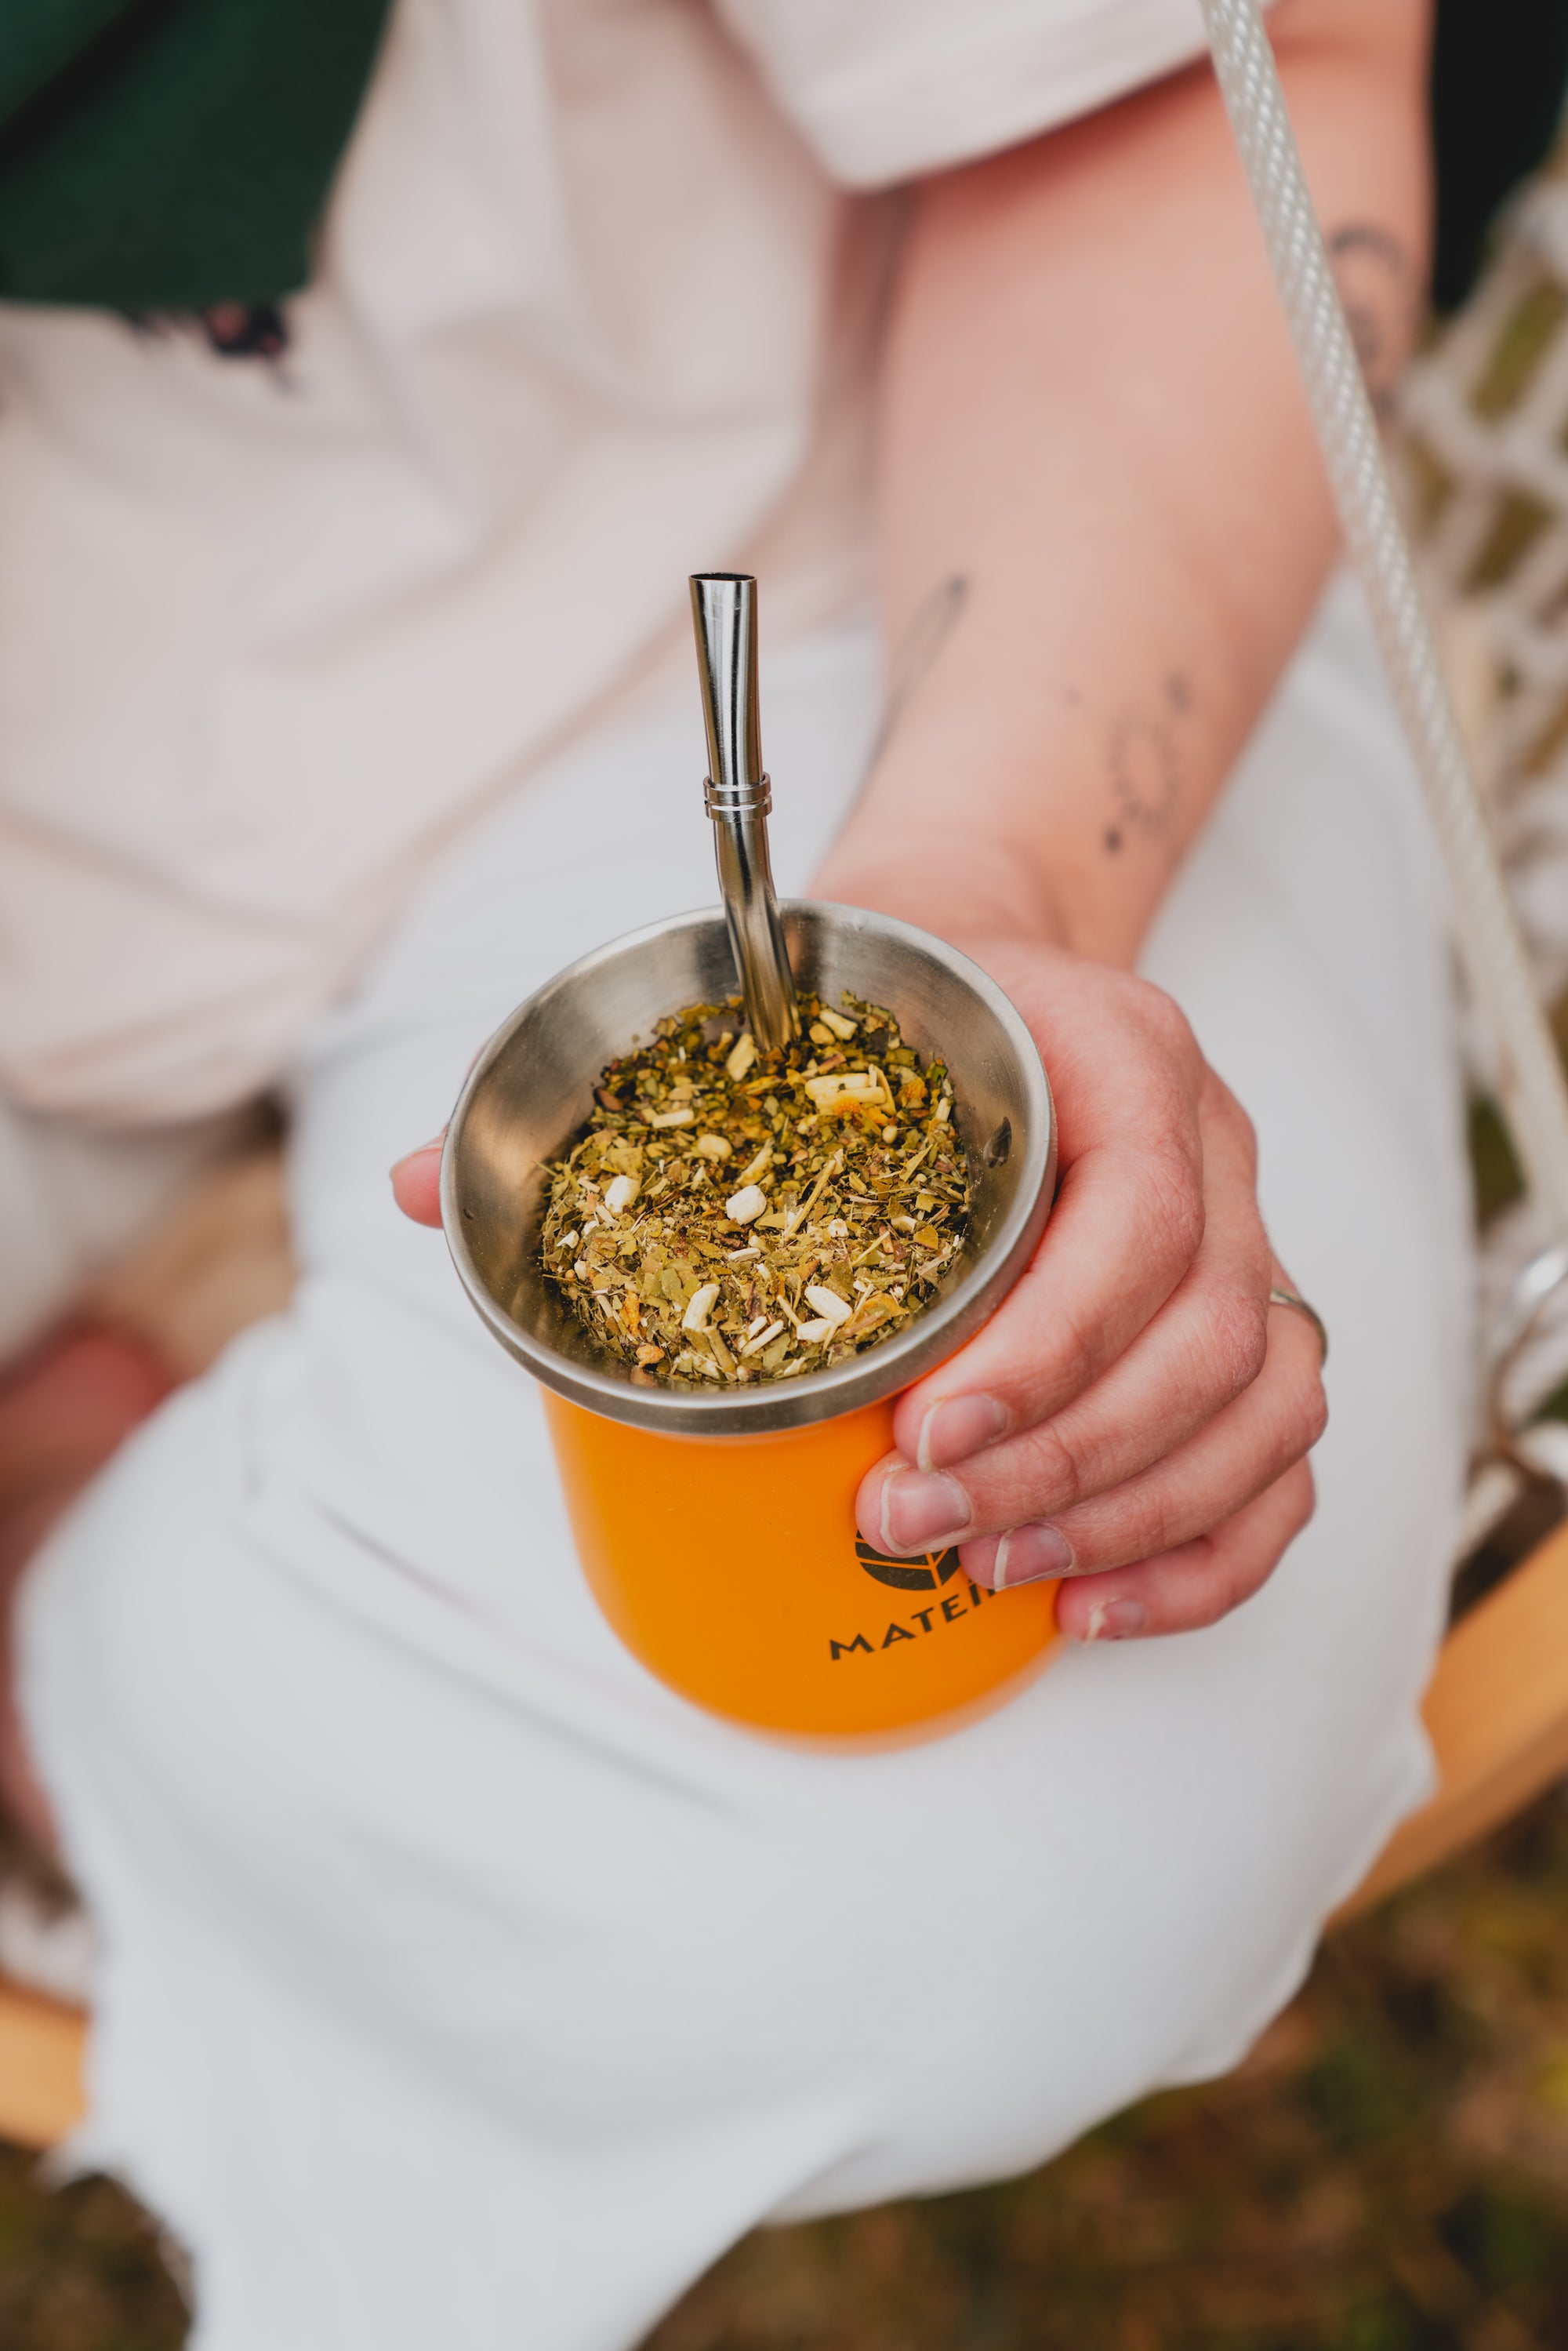 Why Smoked Yerba Mate Poses Risks: Our Safe Alternative